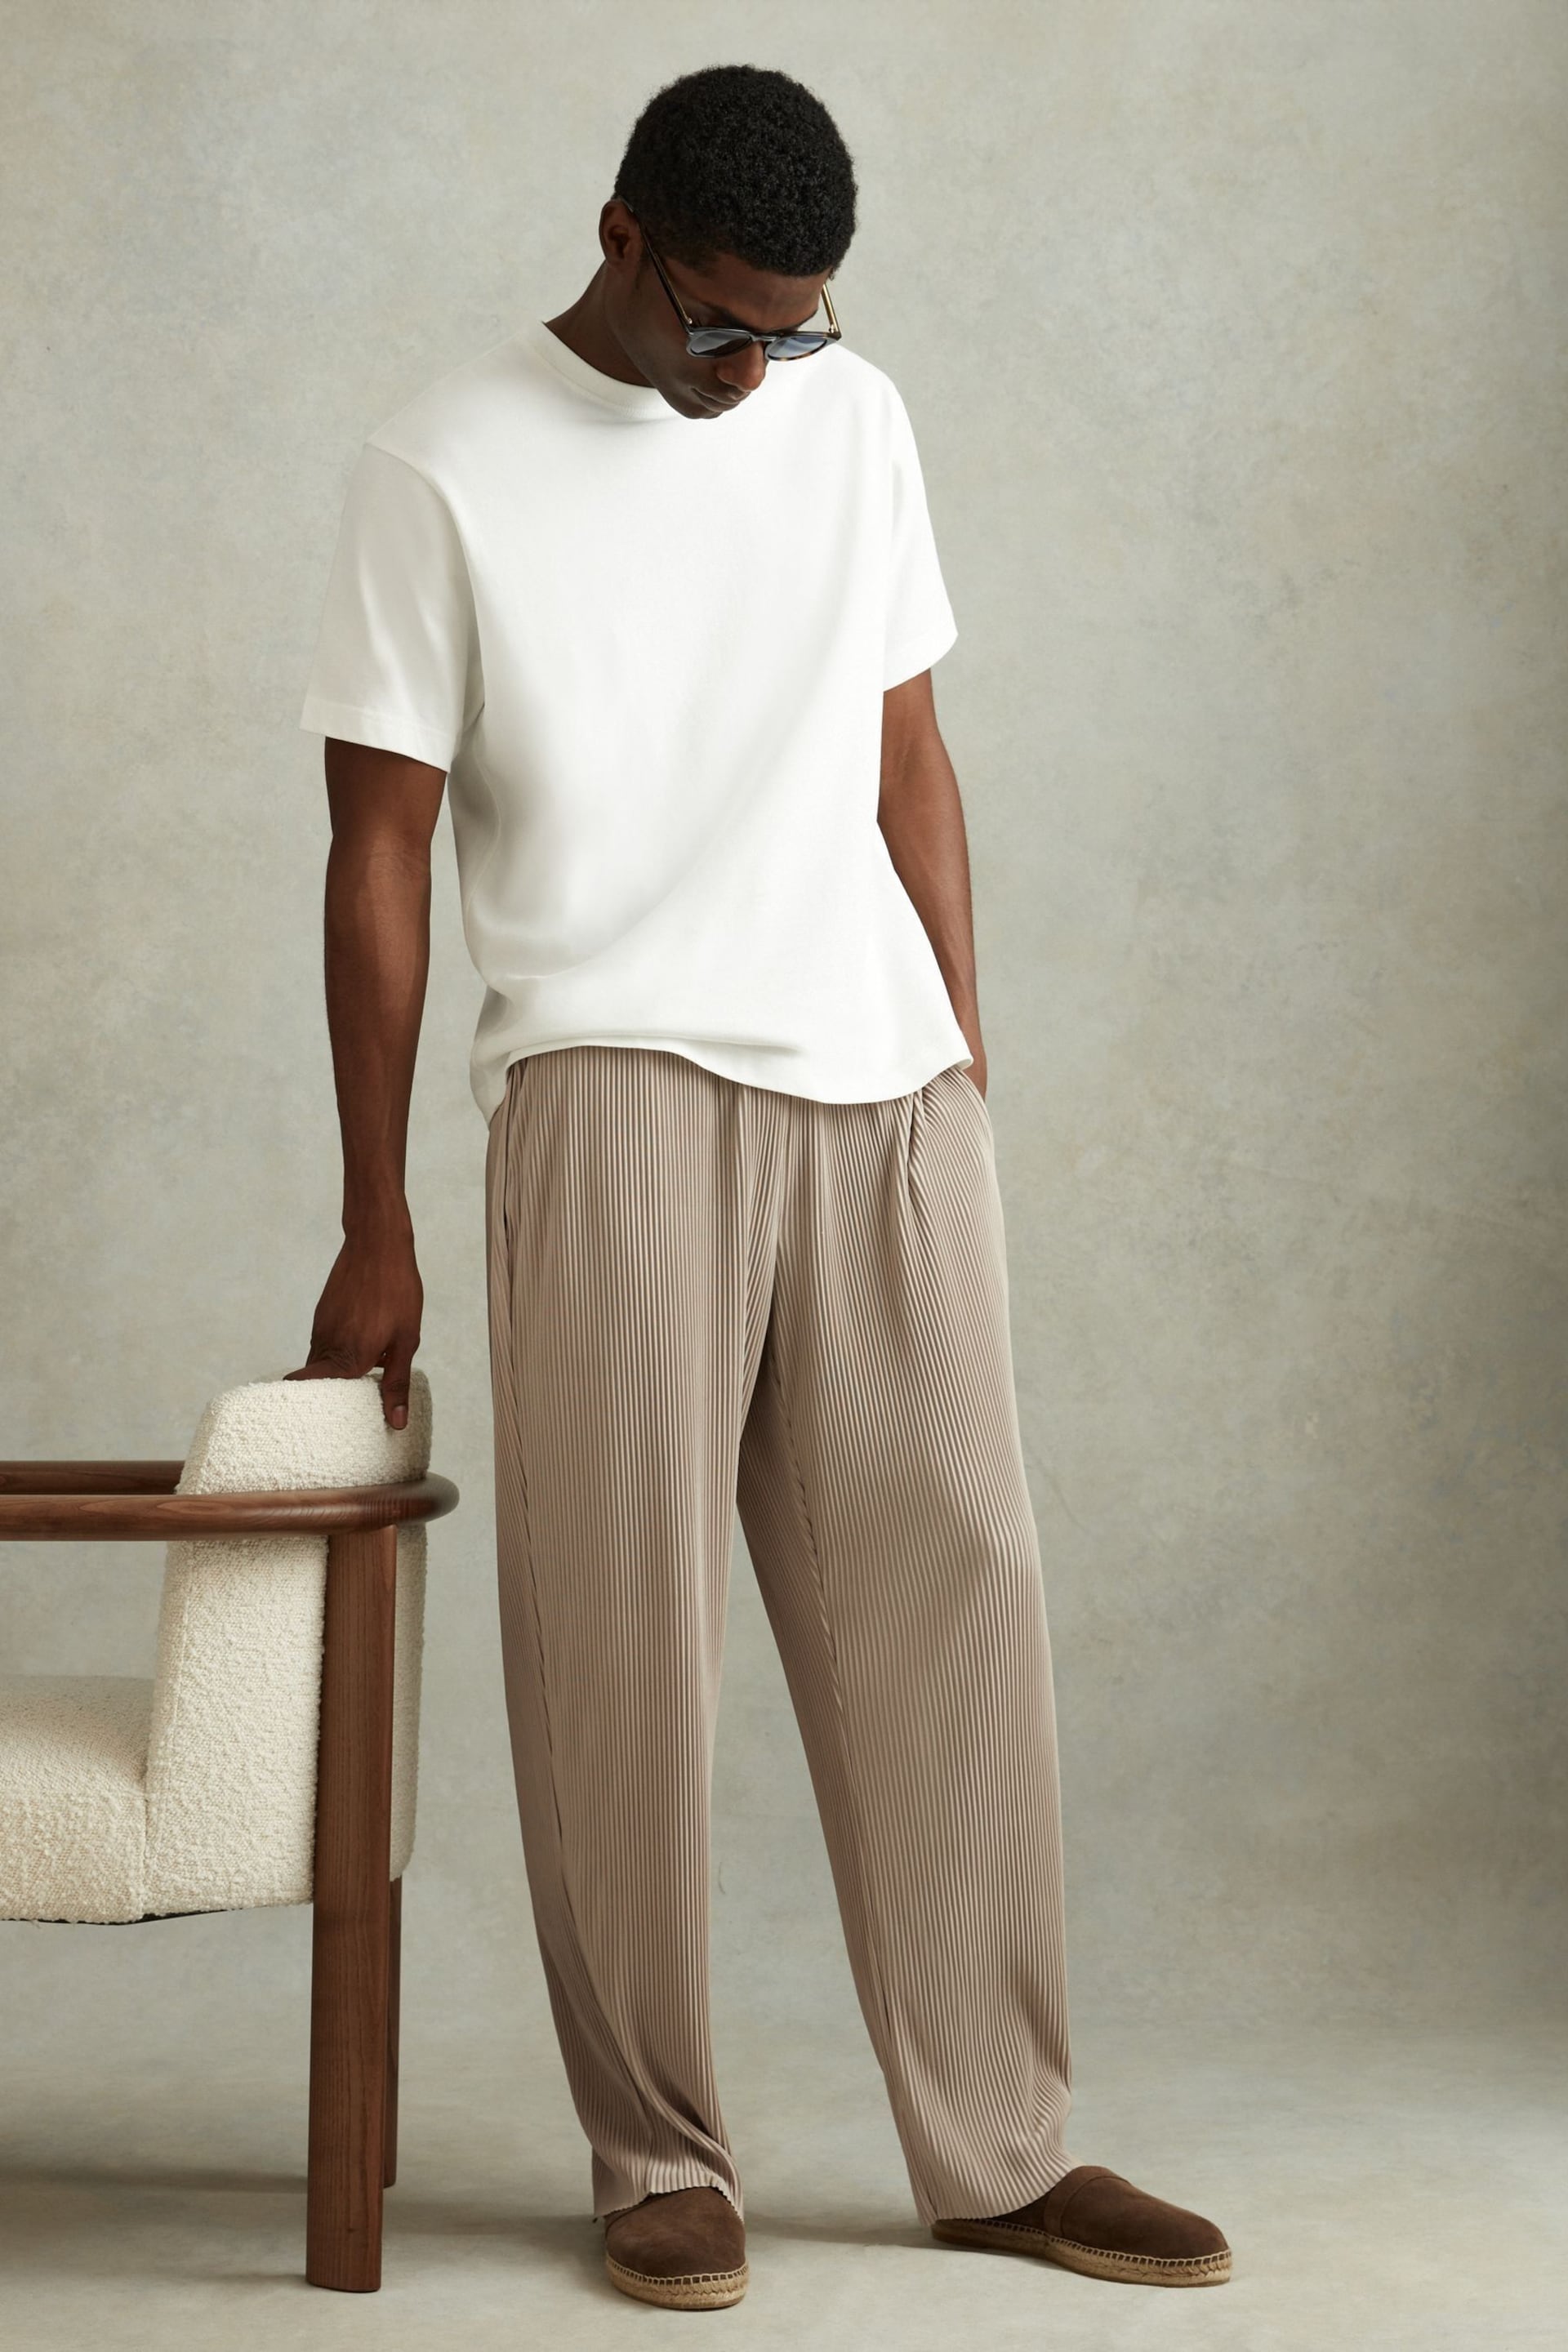 Reiss Champagne Malin Elasticated Plisse Trousers - Image 1 of 6